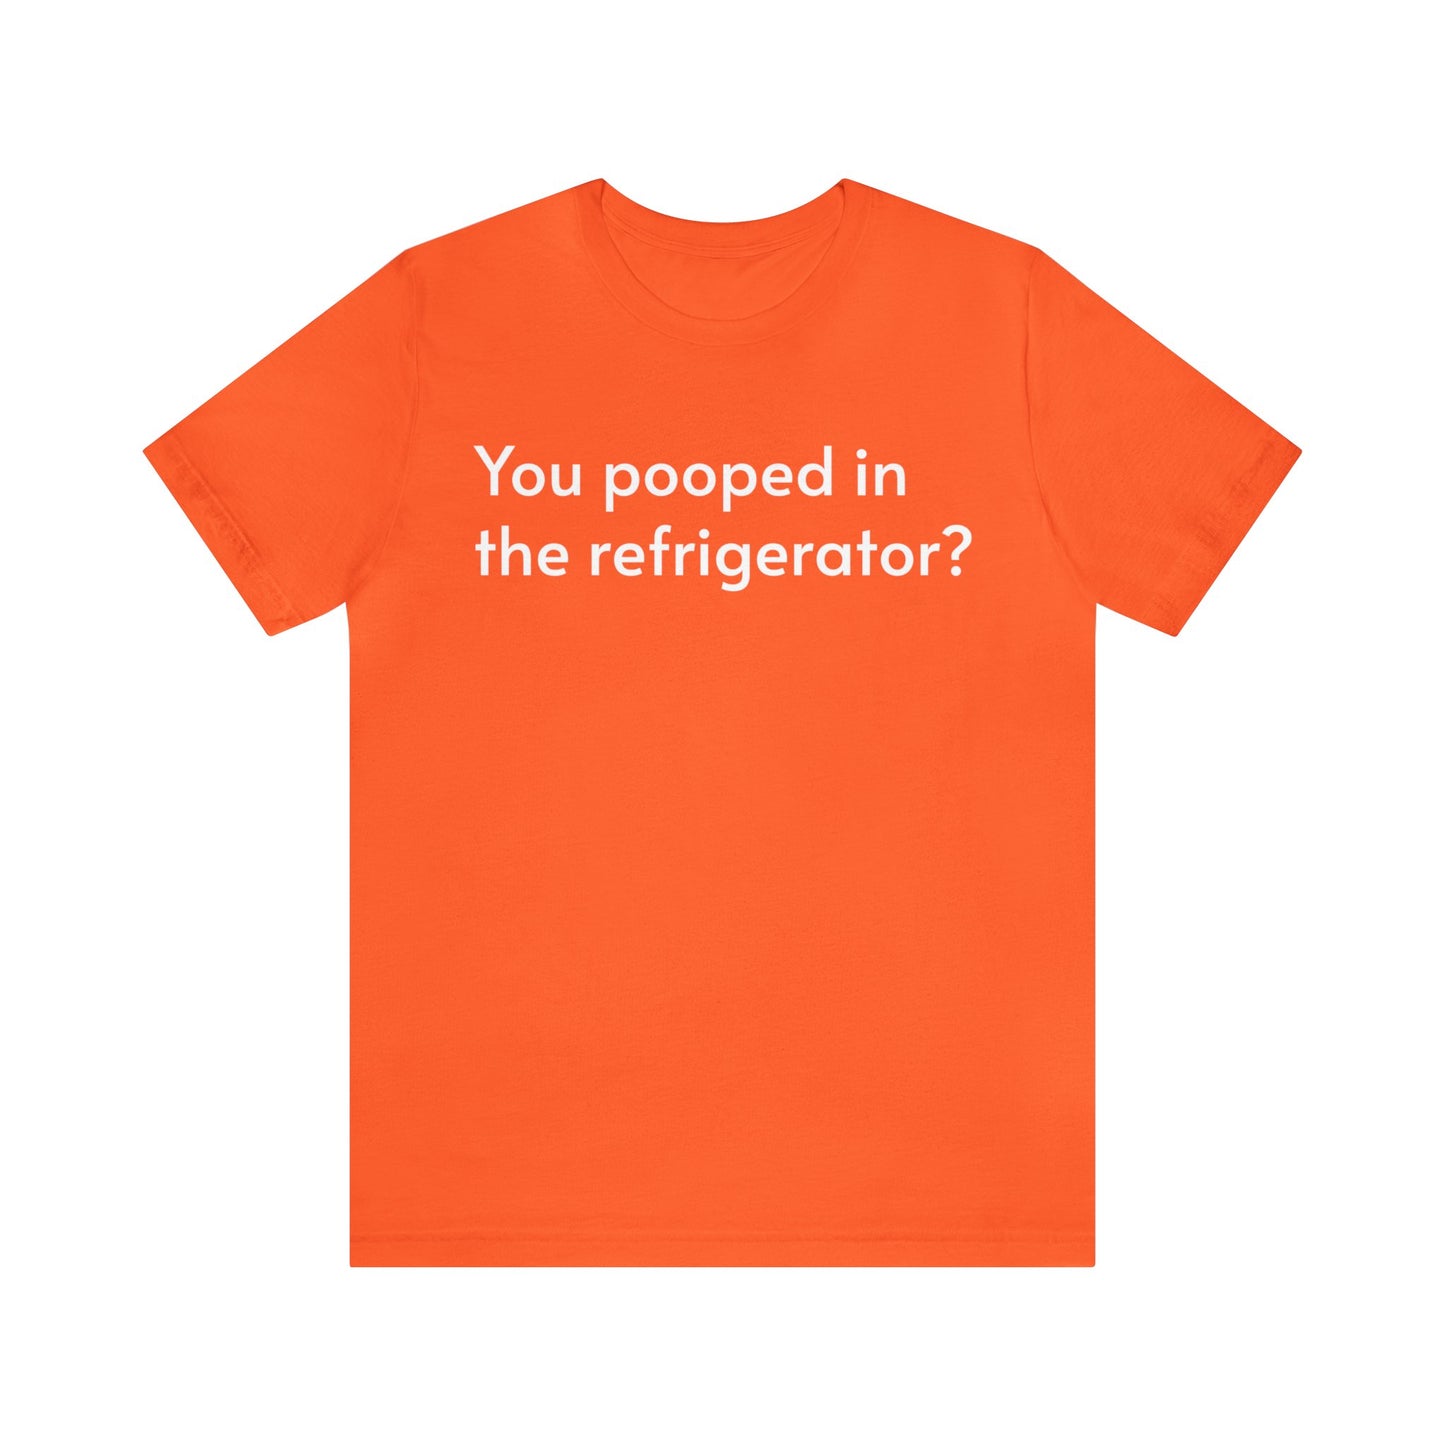 You pooped in the refrigerator?